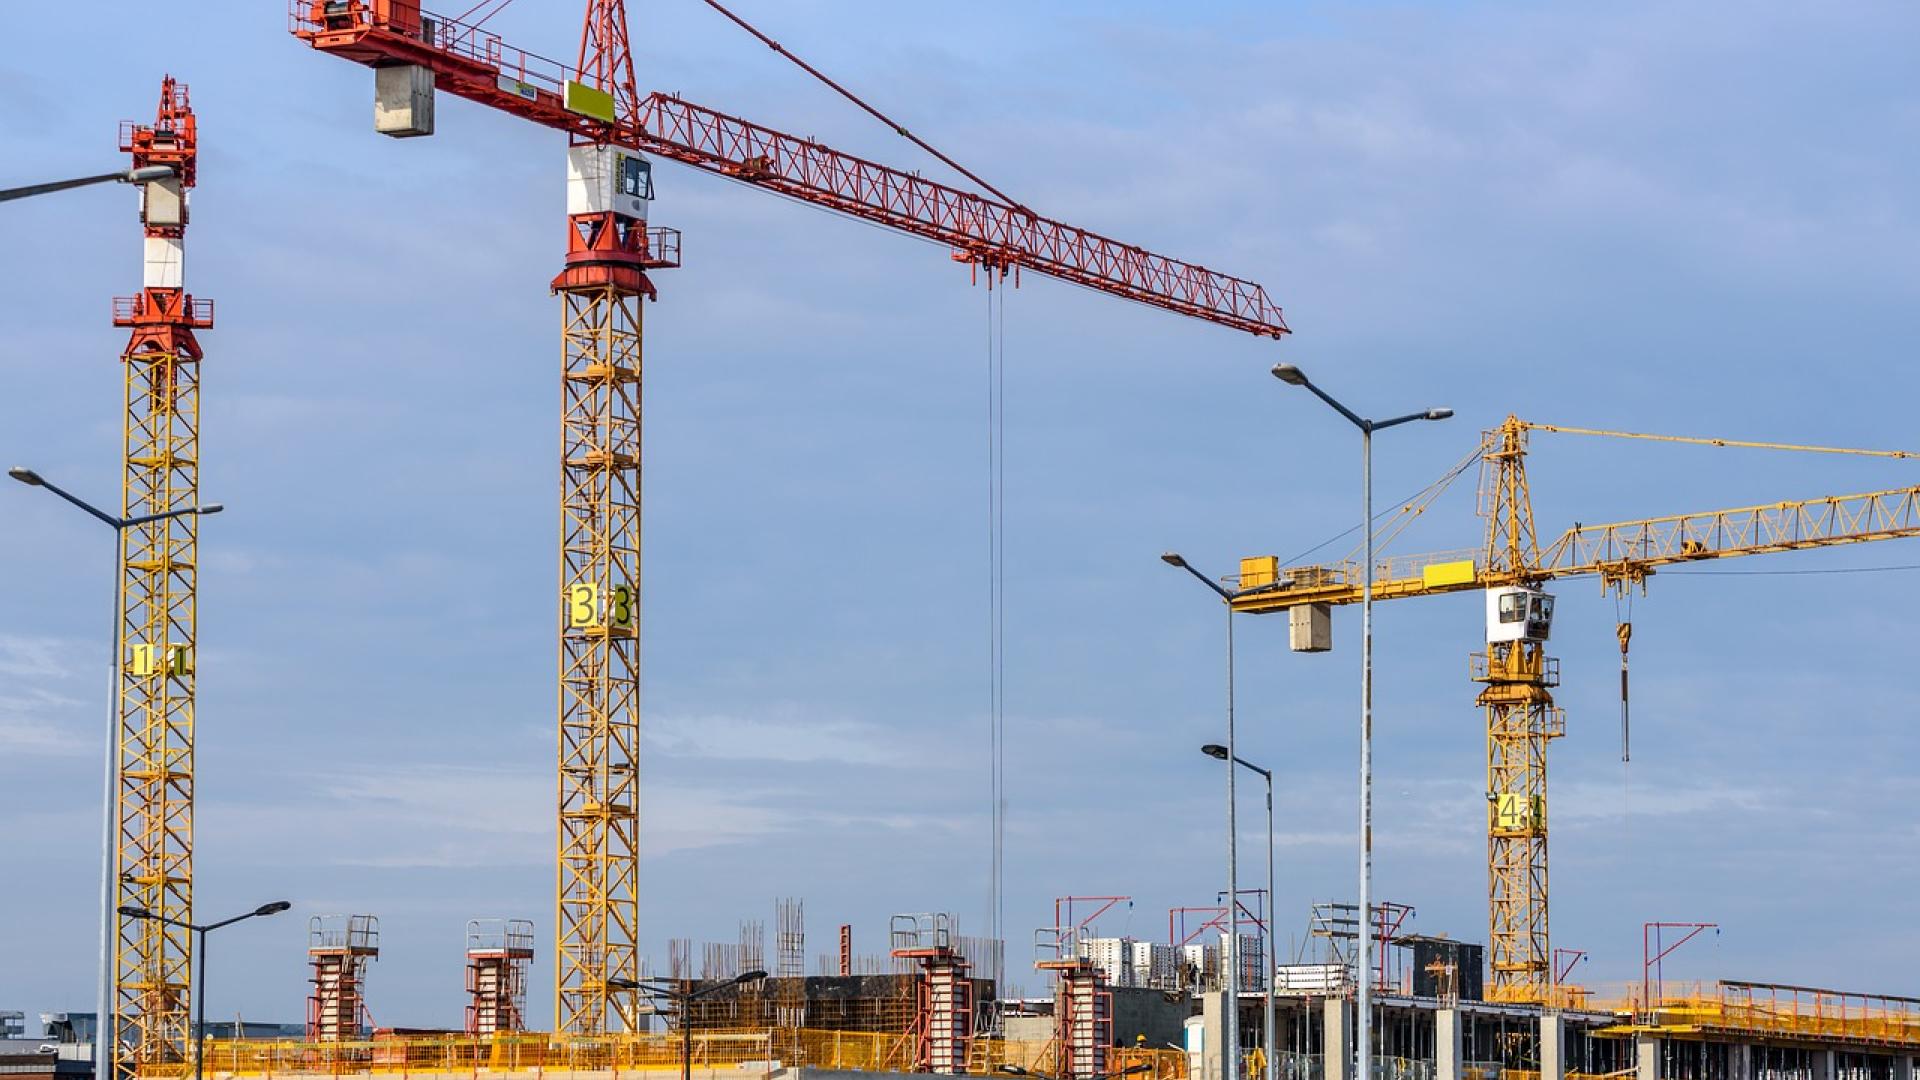 Building the lifts on big construction site with cranes